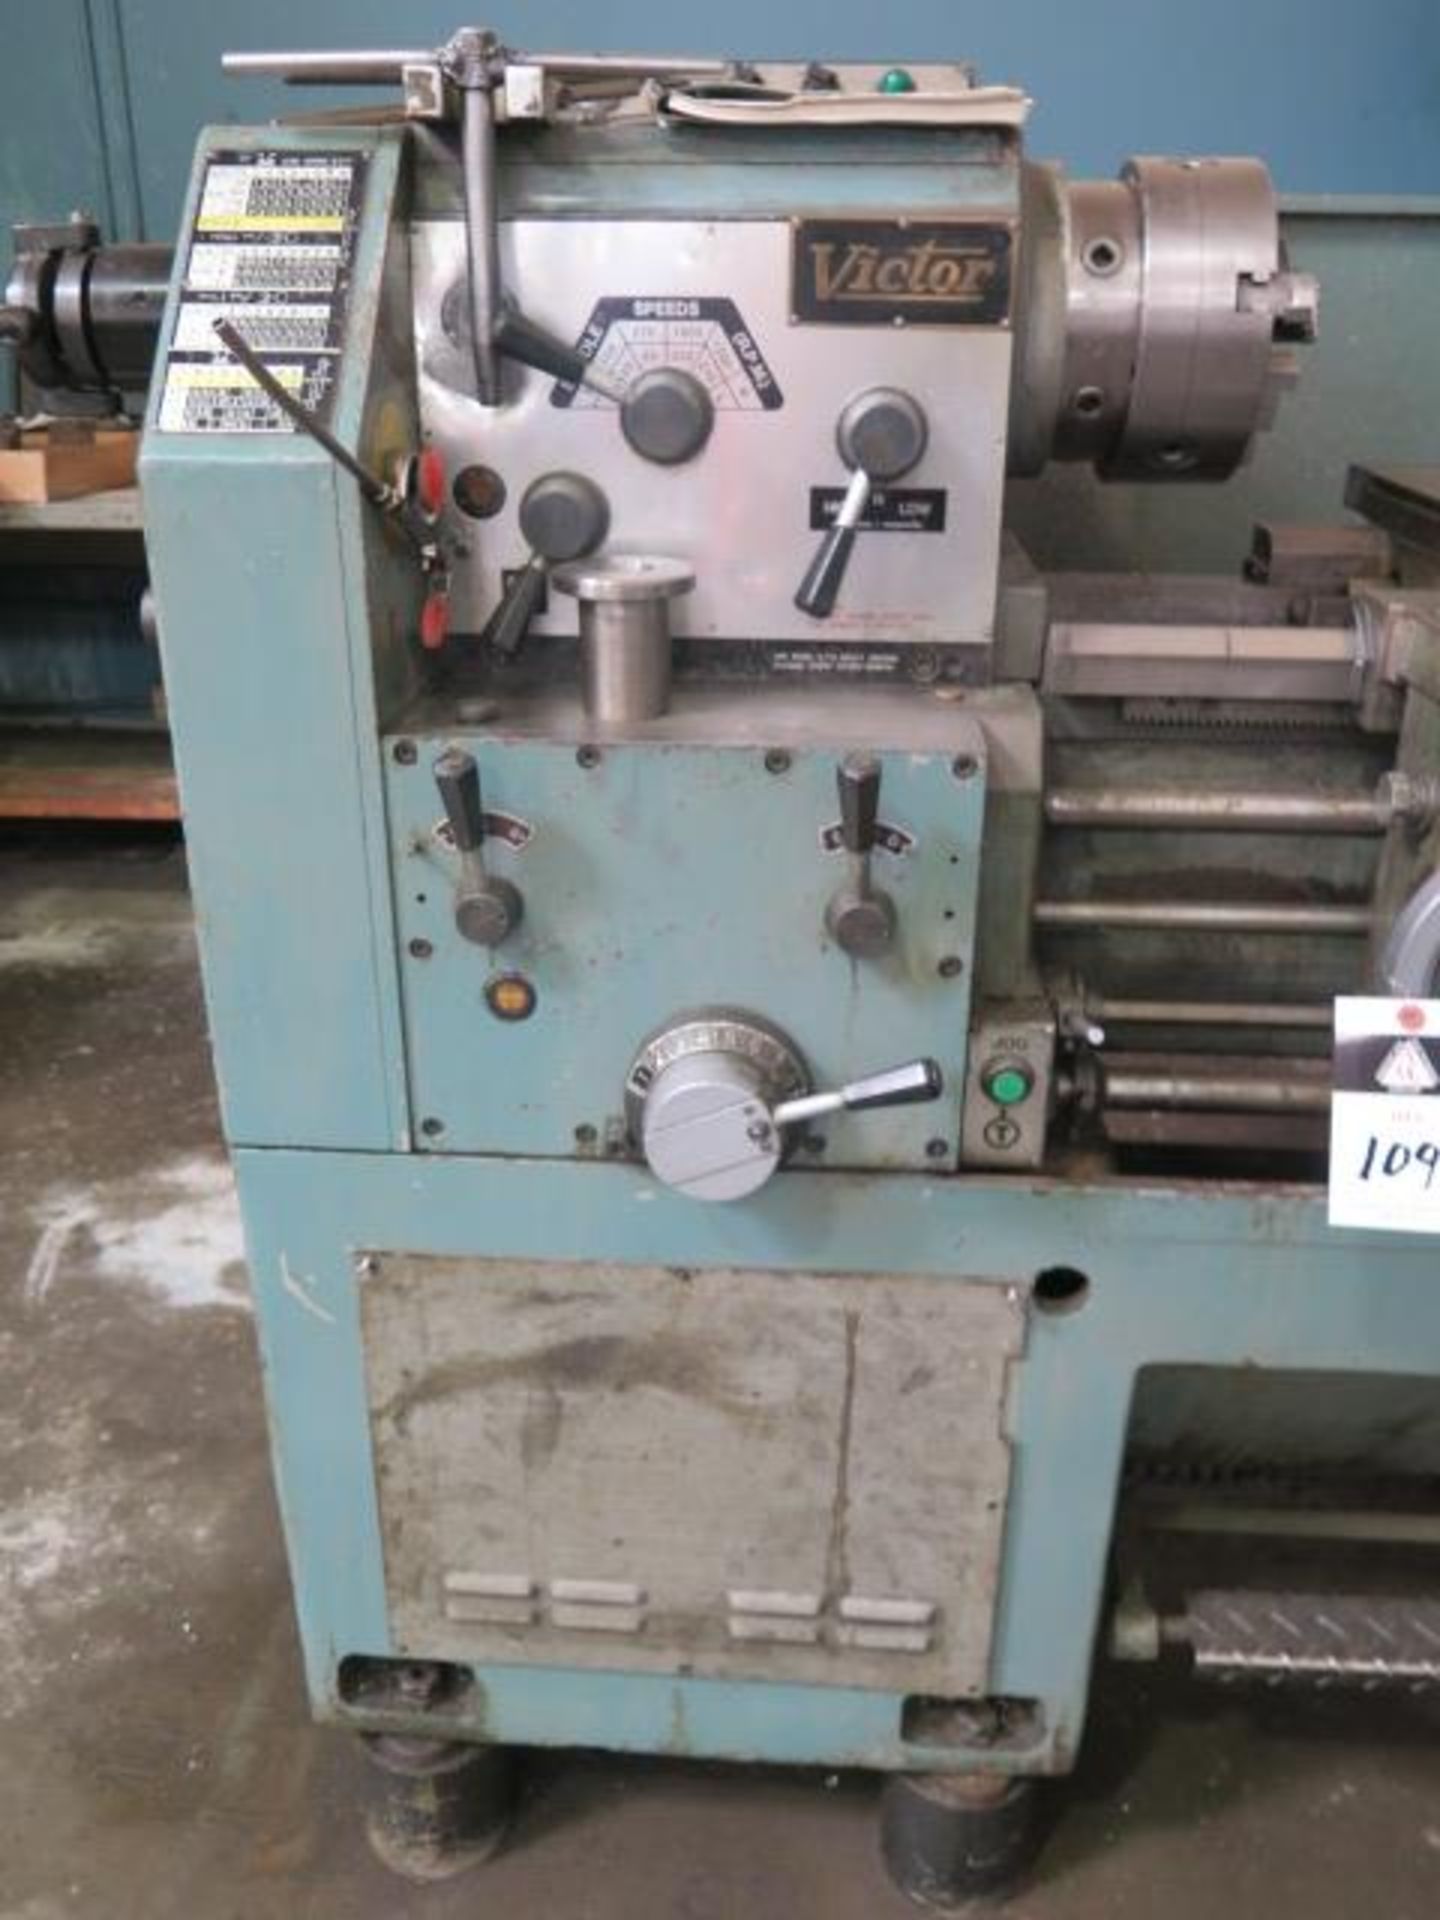 Victor 1630 16” x 30” Geared Head Gap Bed Lathe s/n 551286 w/ 65-1800 RPM, Inch/mm Threading, - Image 3 of 11